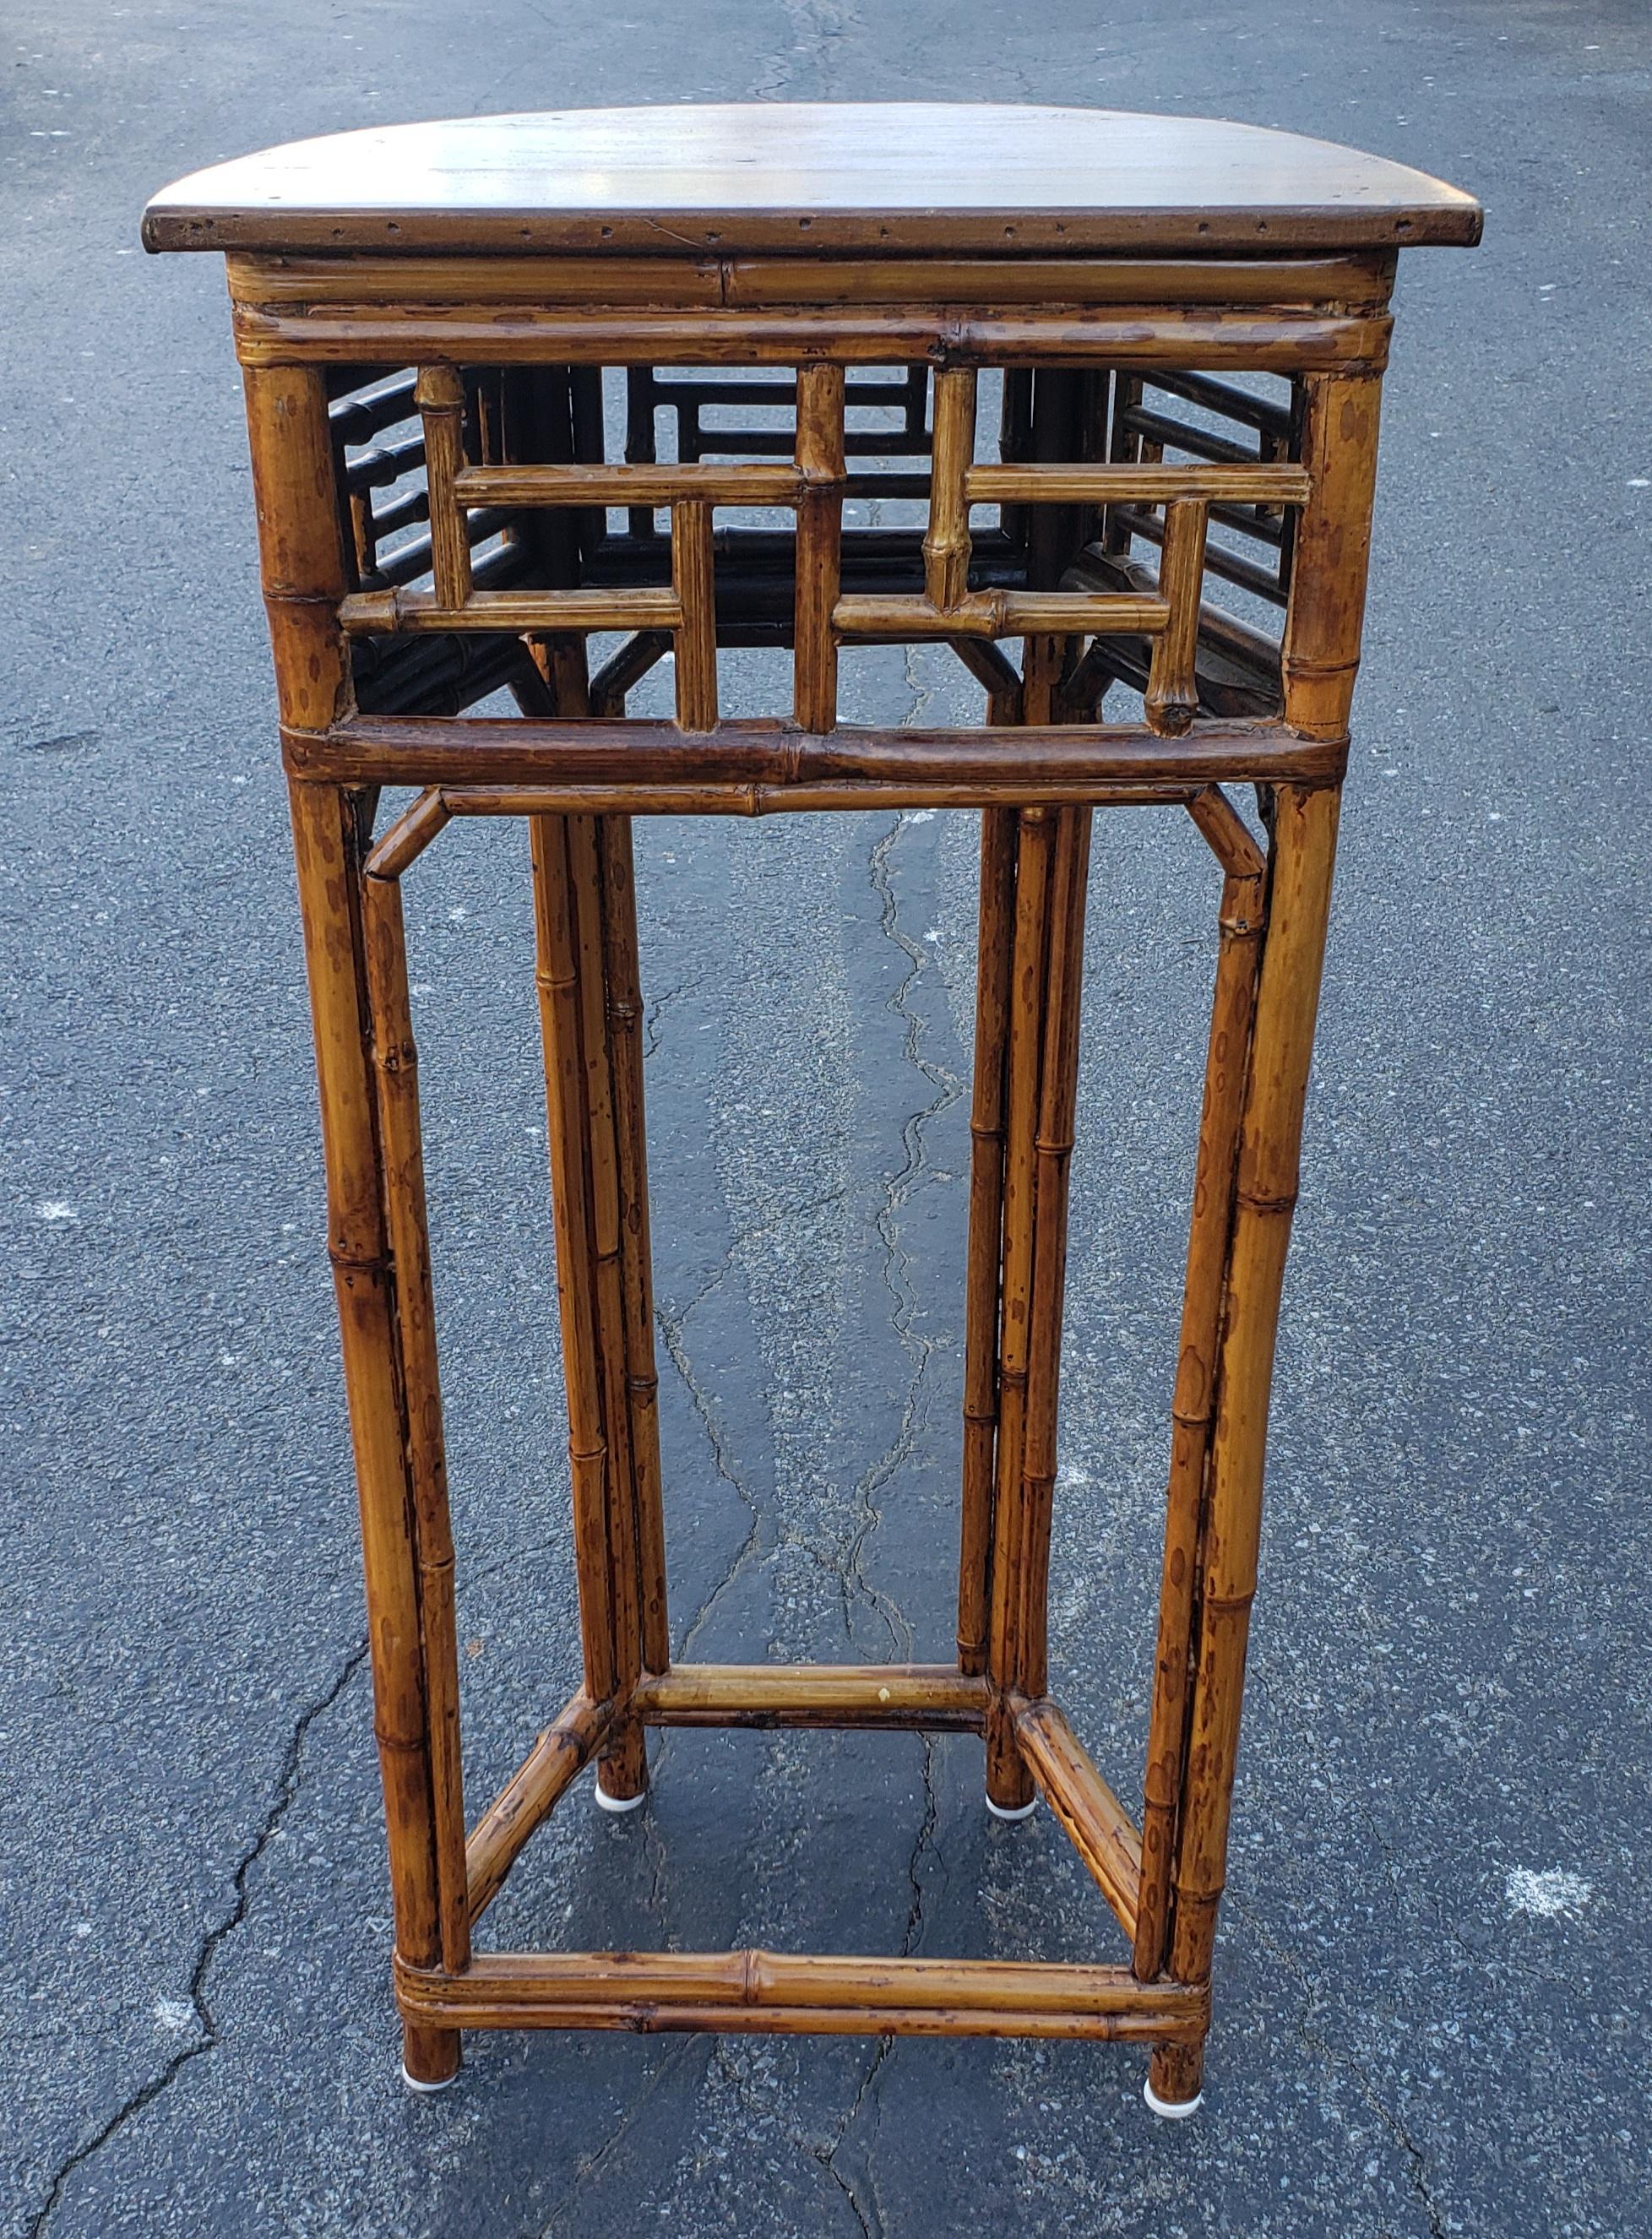 Pair of Midcentury Asian Bamboo and Wood Demilune Side Tables or Plant Stands 1